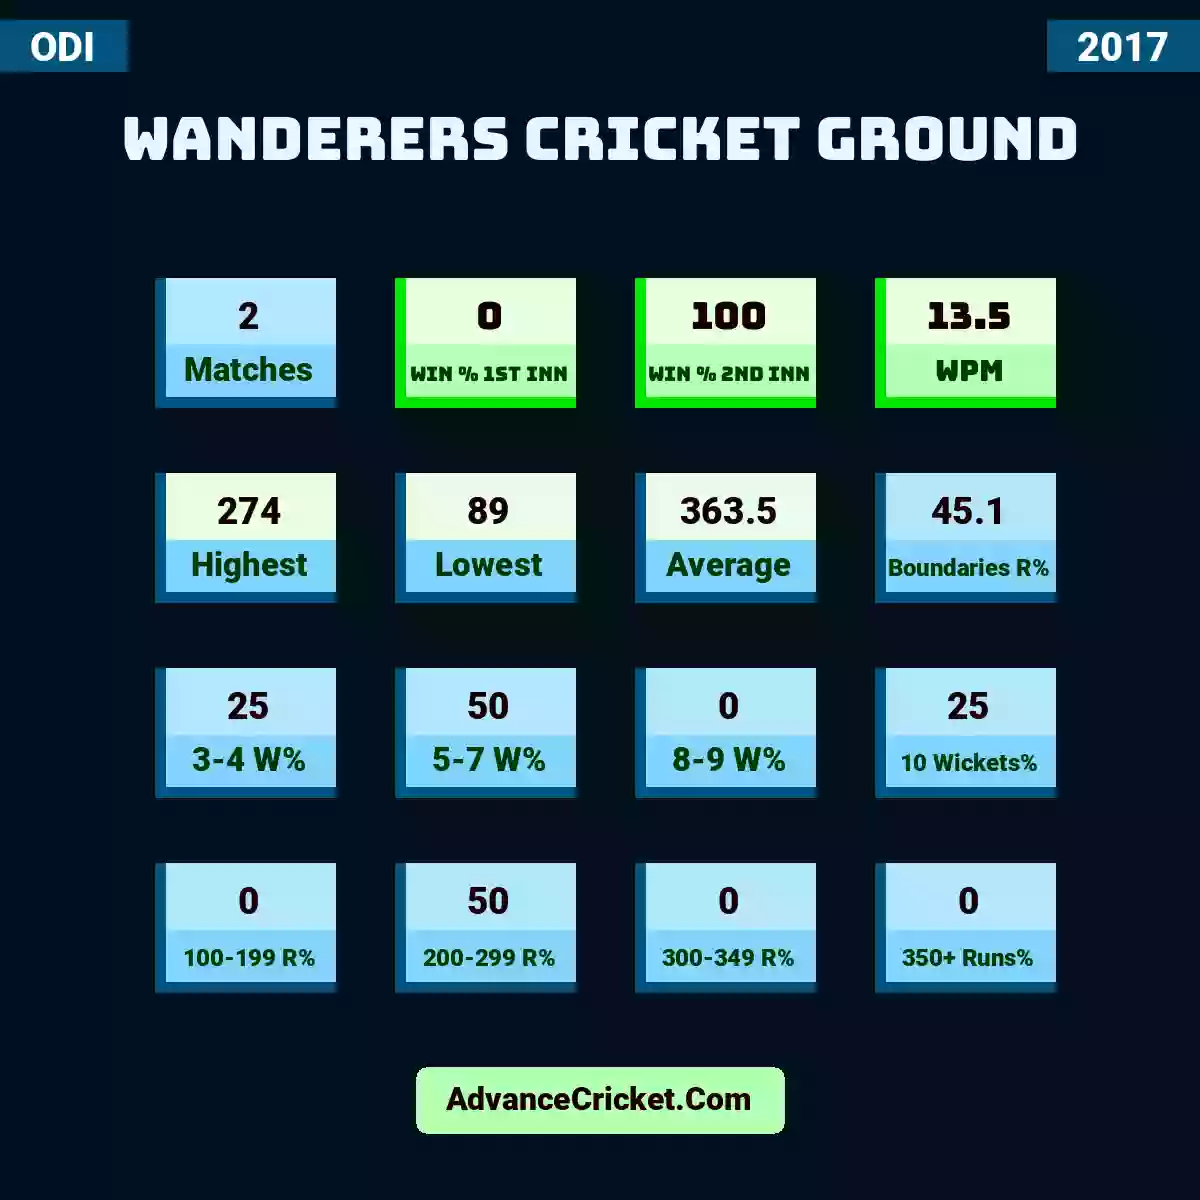 Image showing Wanderers Cricket Ground with Matches: 2, Win % 1st Inn: 0, Win % 2nd Inn: 100, WPM: 13.5, Highest: 274, Lowest: 89, Average: 363.5, Boundaries R%: 45.1, 3-4 W%: 25, 5-7 W%: 50, 8-9 W%: 0, 10 Wickets%: 25, 100-199 R%: 0, 200-299 R%: 50, 300-349 R%: 0, 350+ Runs%: 0.